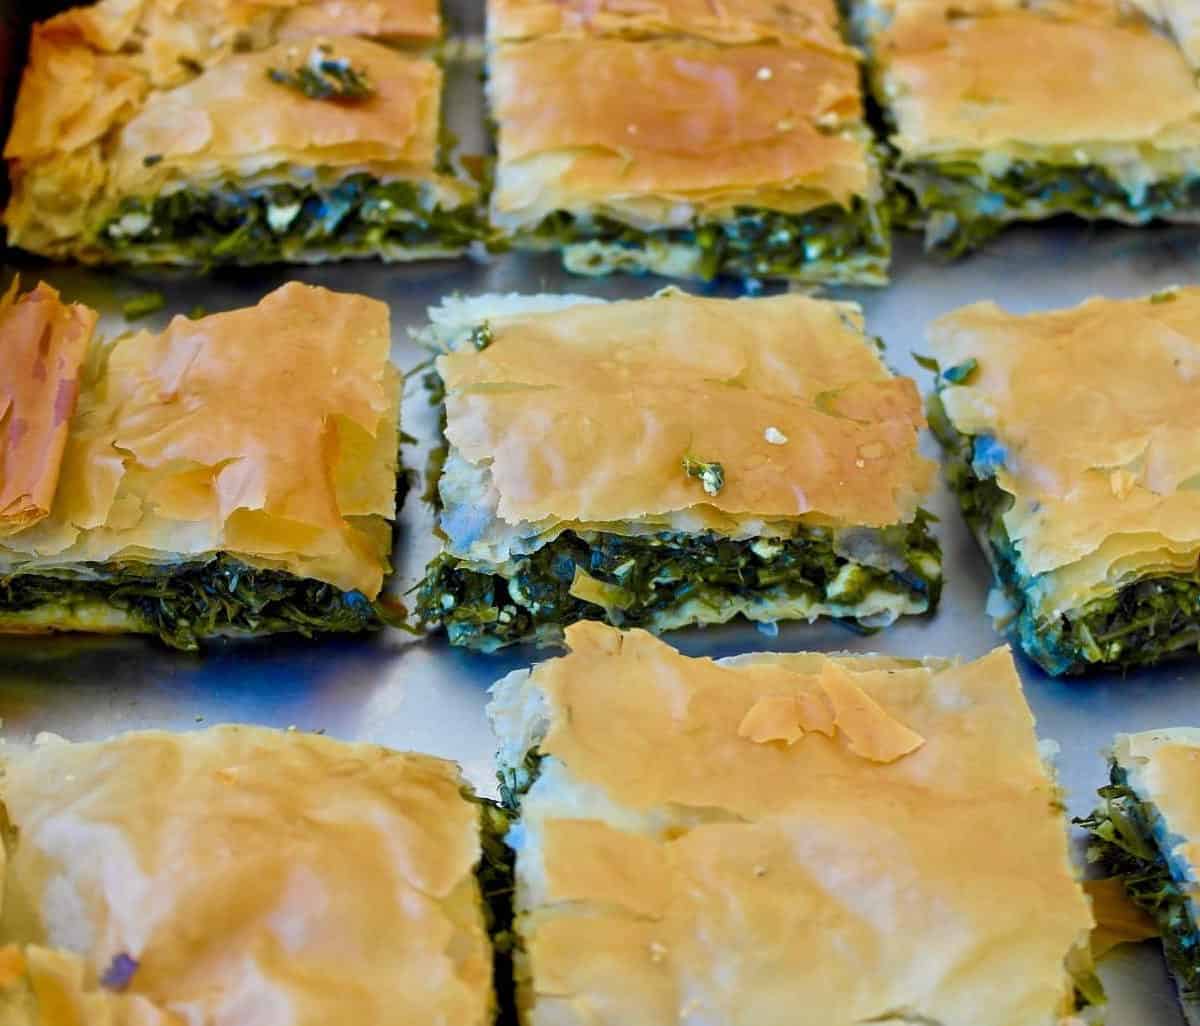  Get ready to transport your taste buds to Greece with this traditional spanakopita